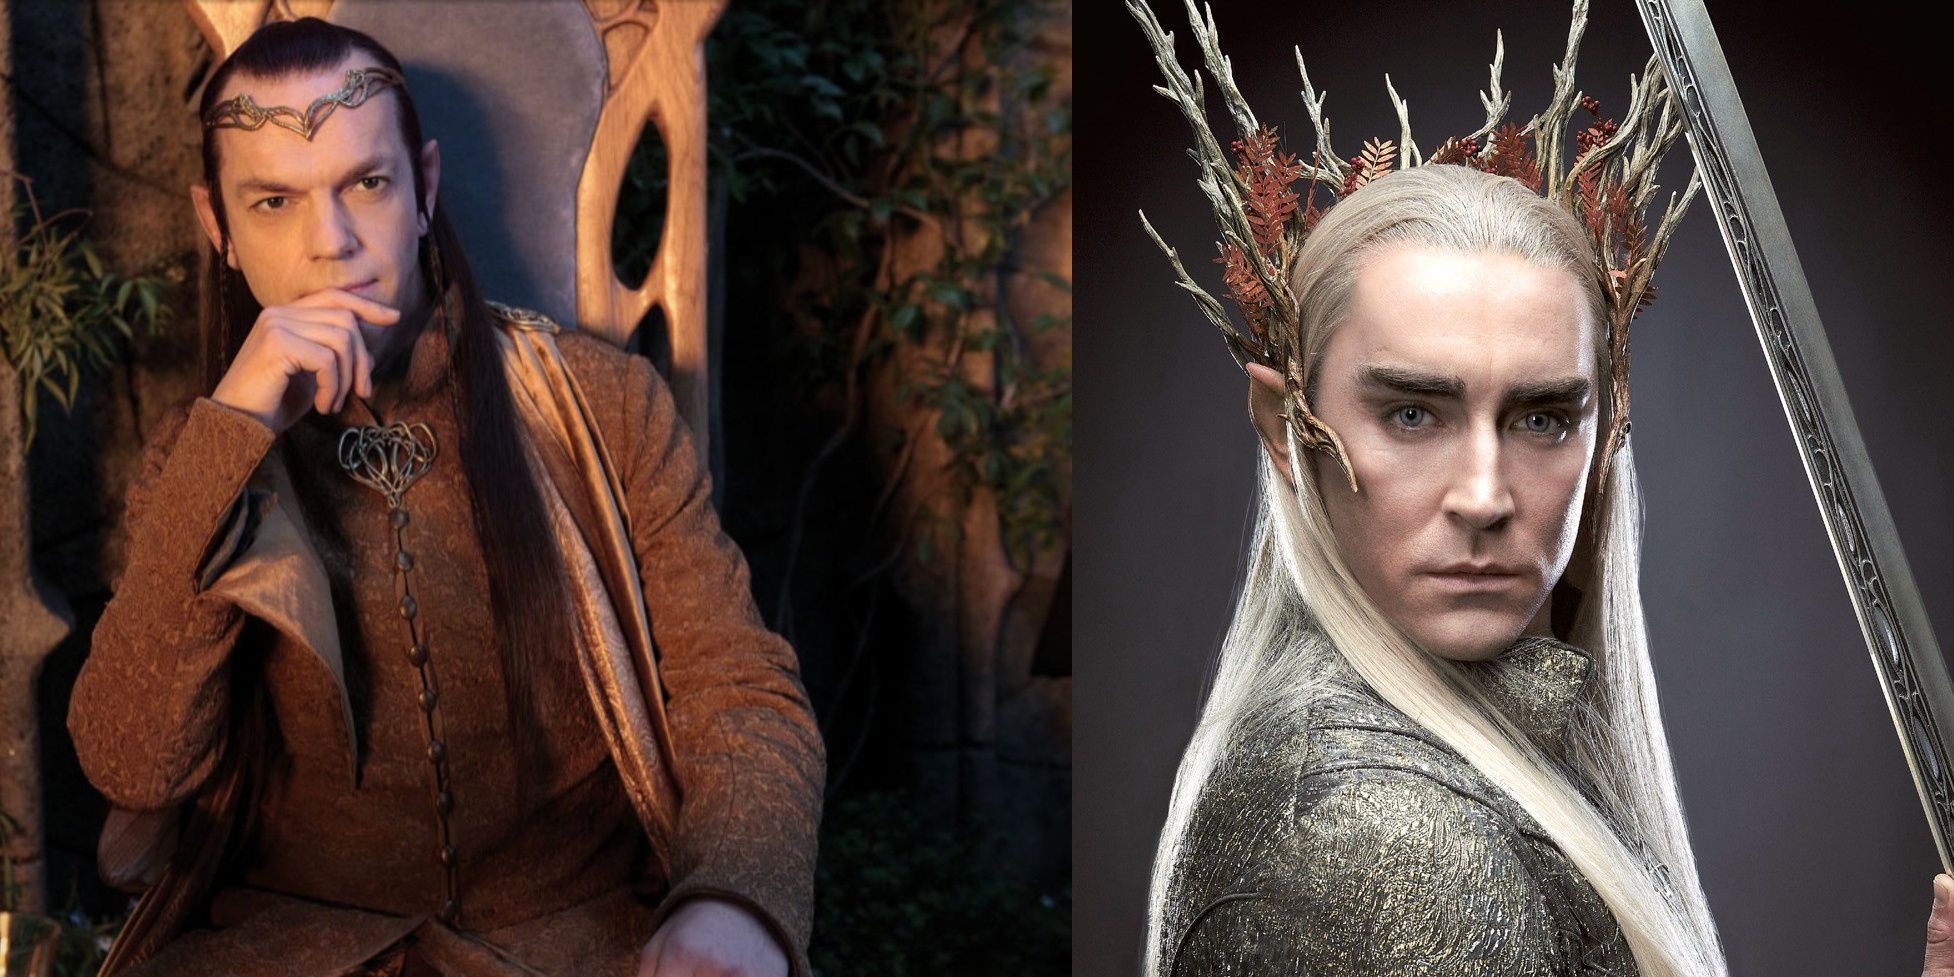 The 10 Most Tragic Characters From The Hobbit & Lord Of The Rings, Ranked